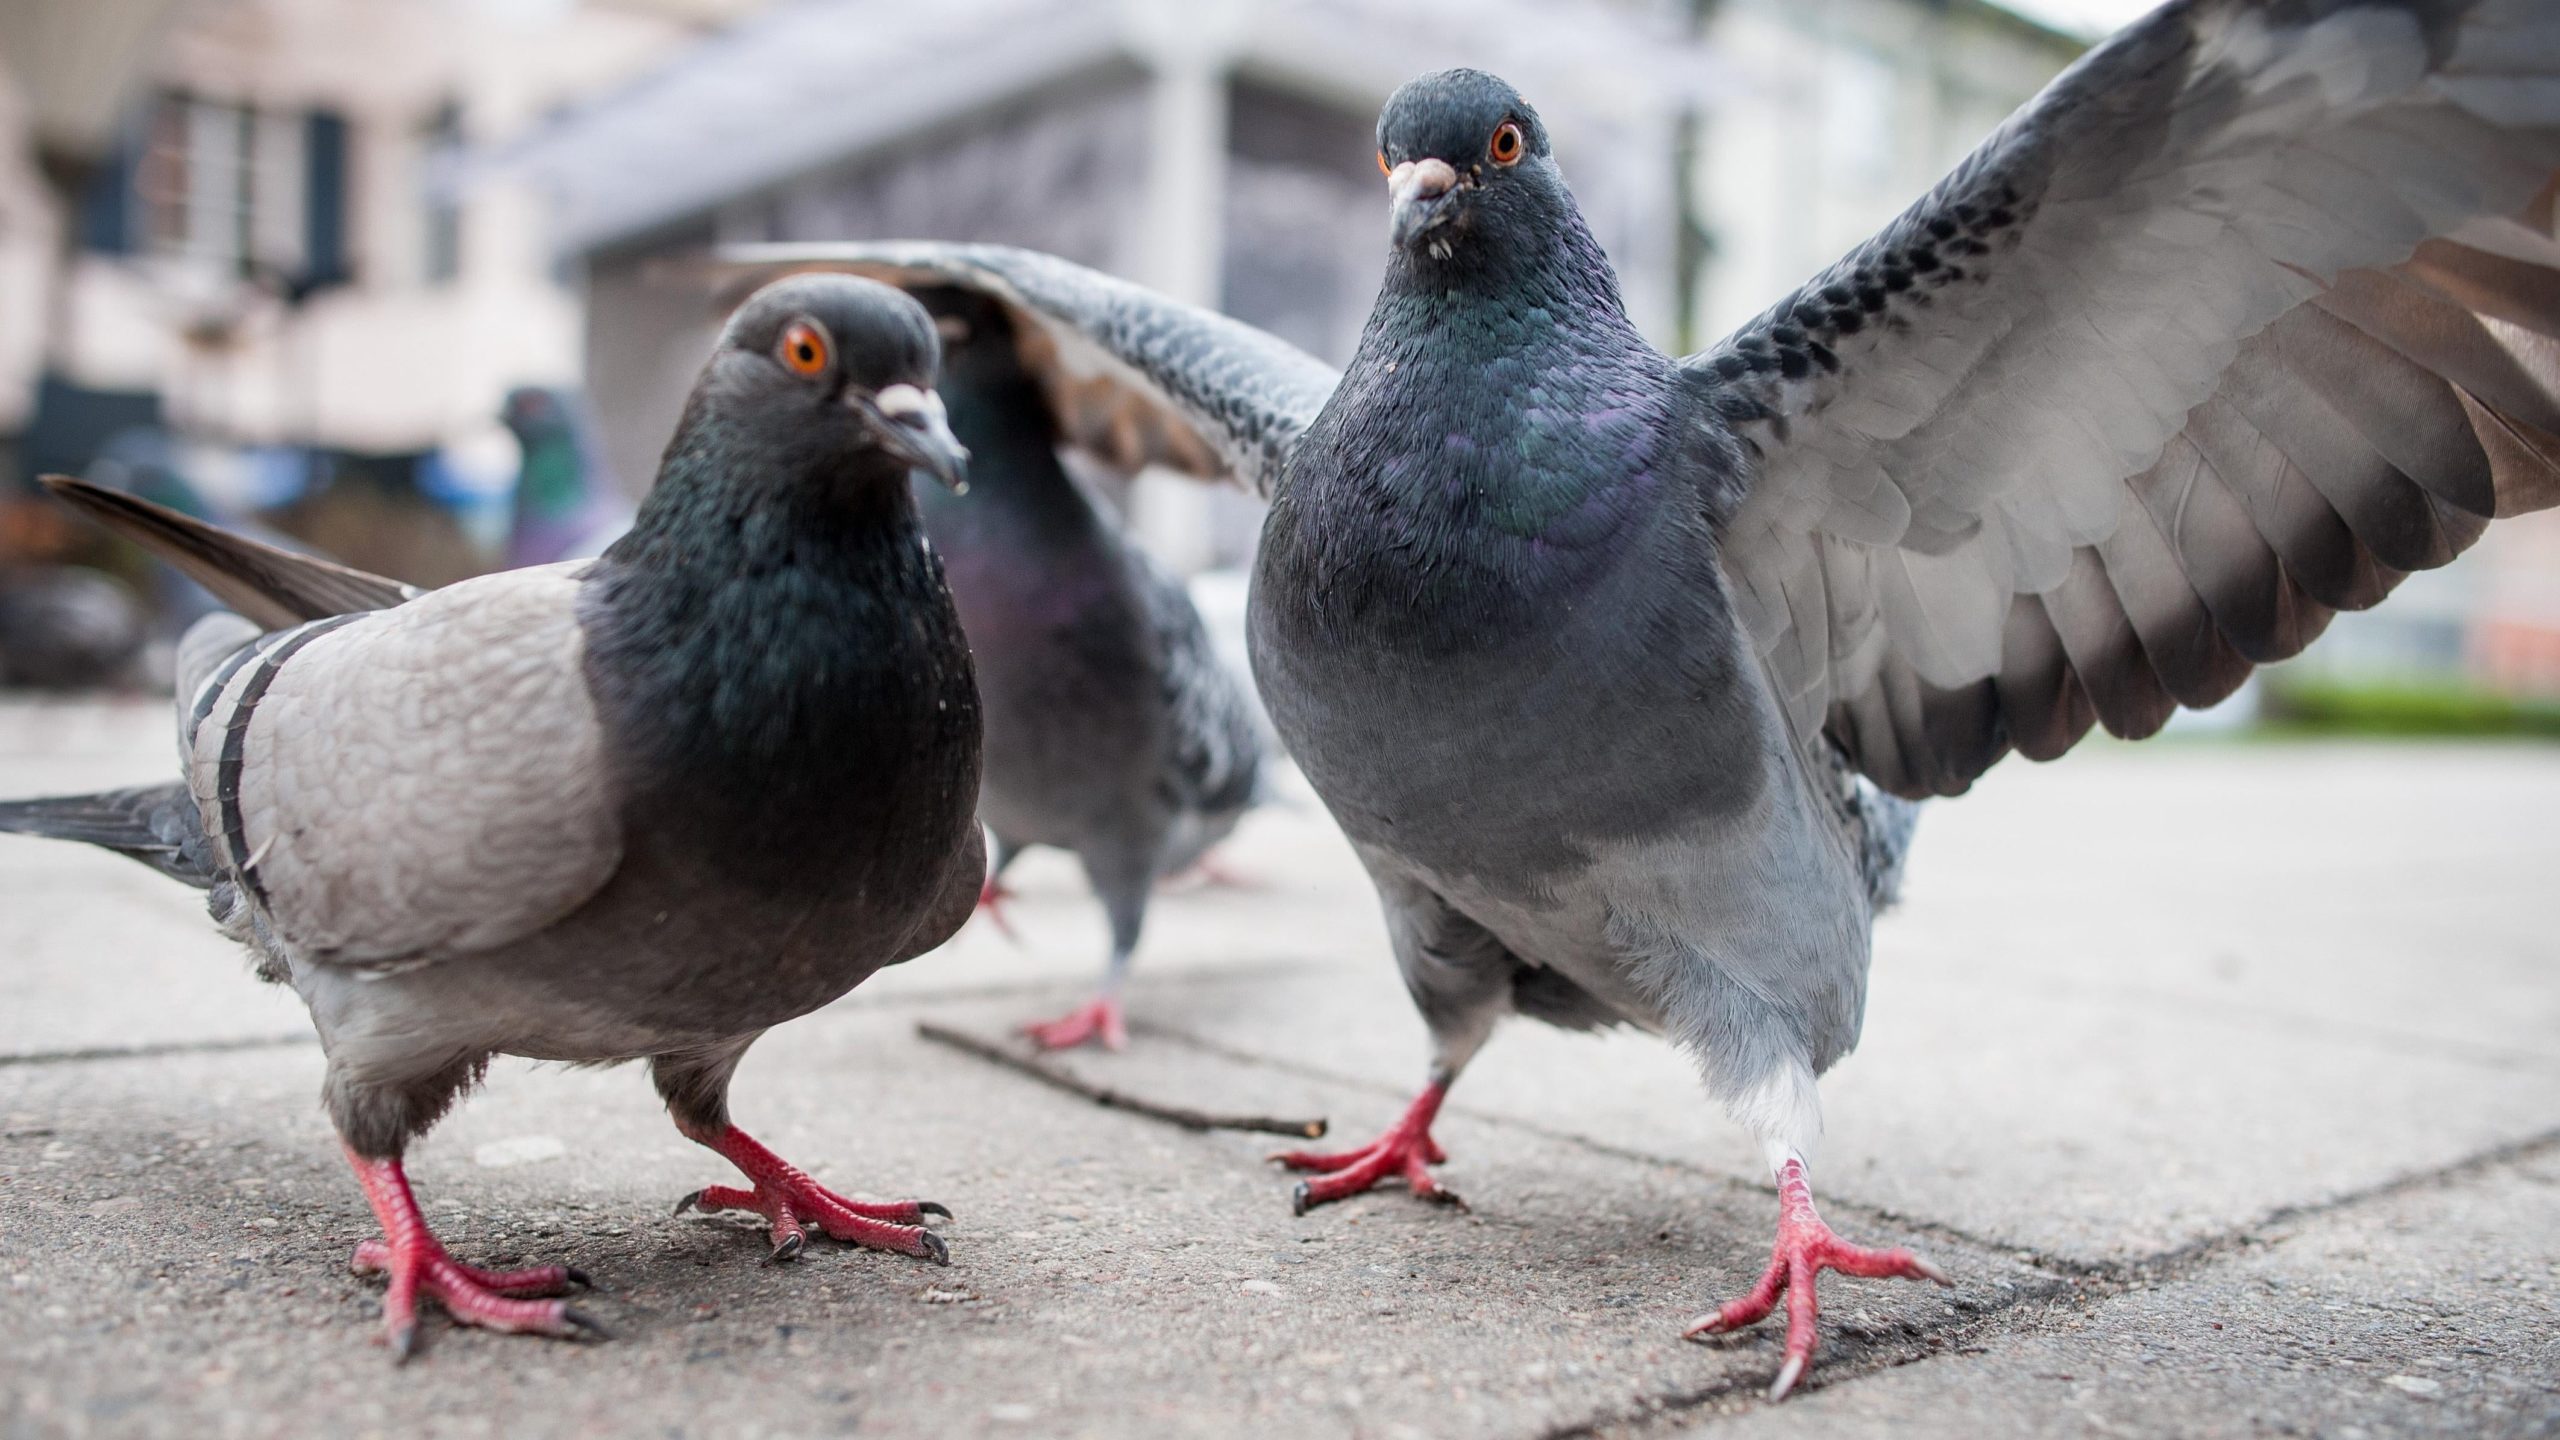 How to Get Rid of a Bunch of Arsehole Pigeons